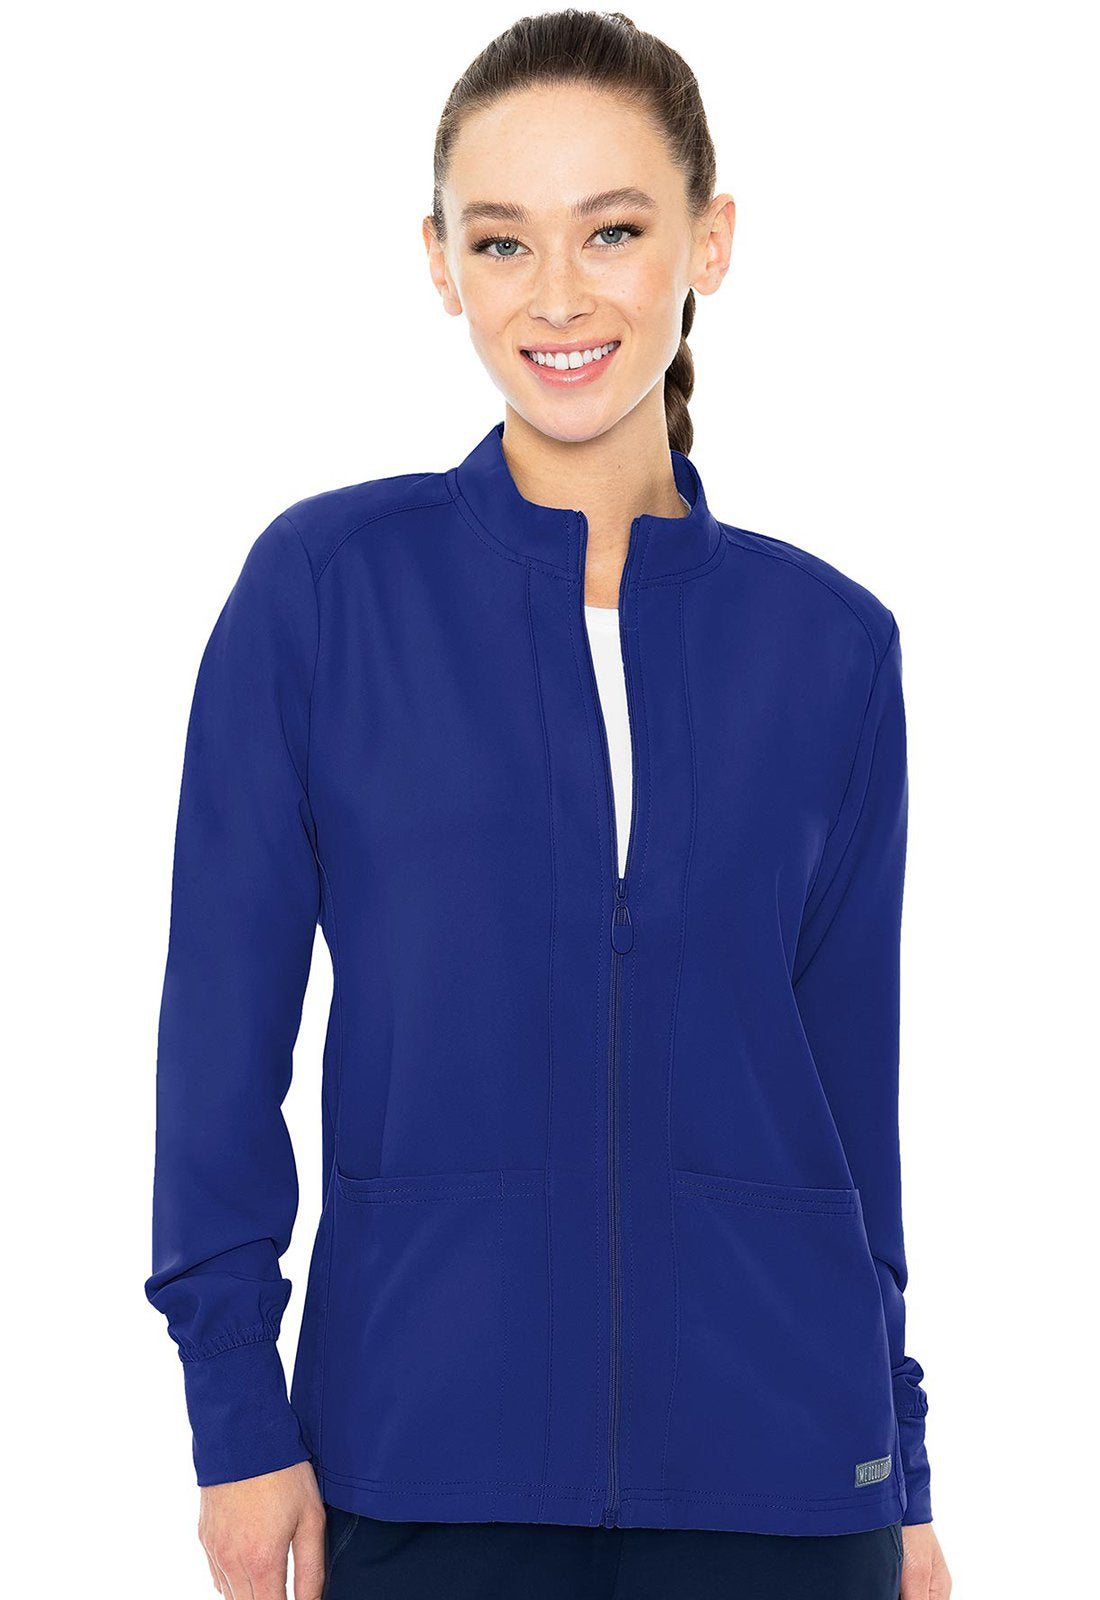 Med Couture MC Insight Galaxy / 2XL MC Insight  Zip Front Warm-Up With Shoulder Yokes MC2660